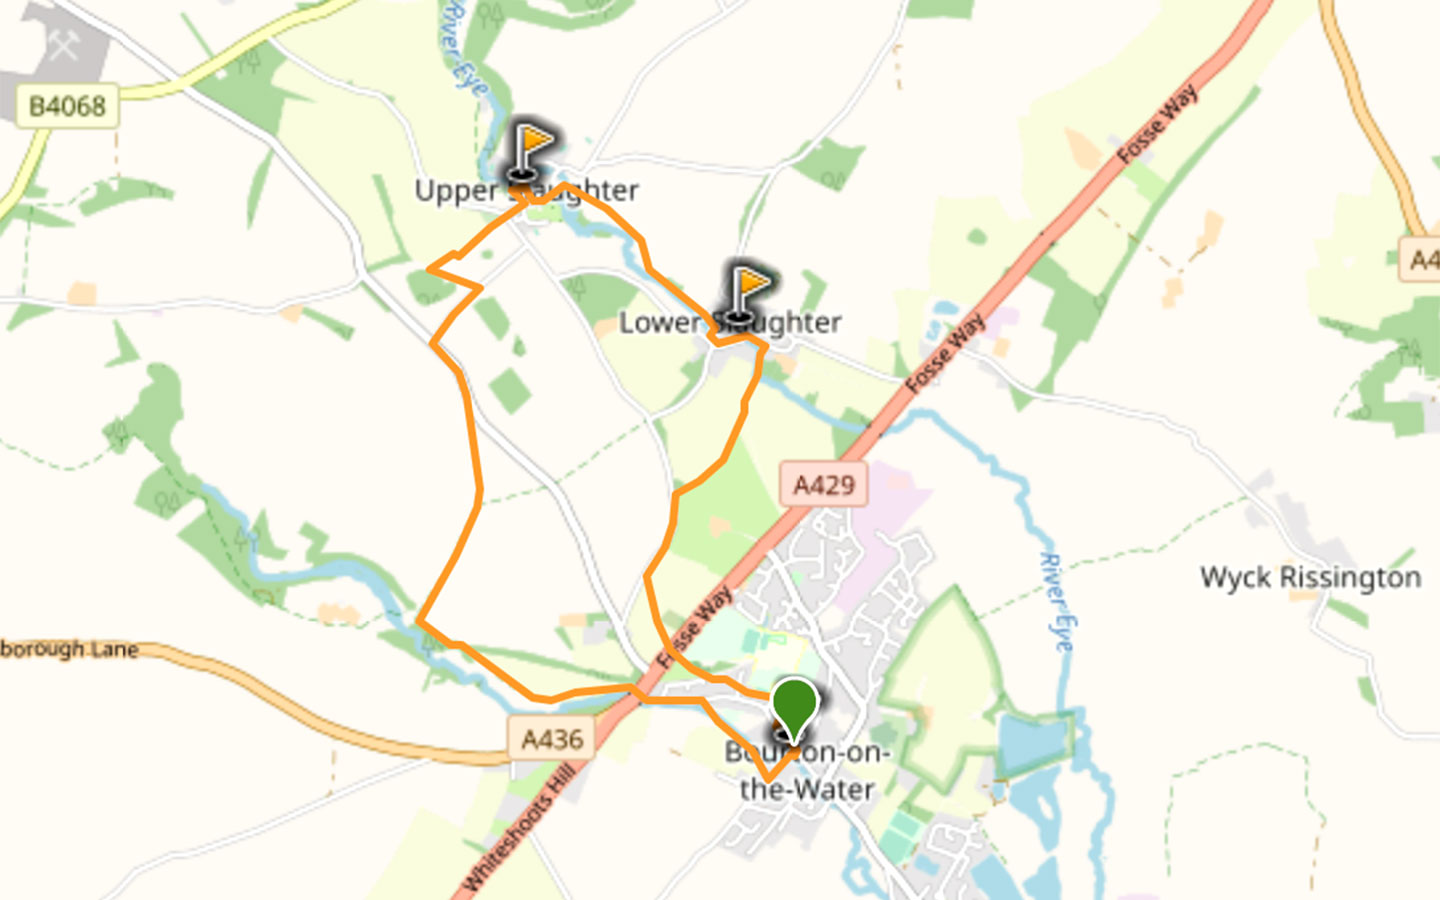 Map of the Bourton-on-the-Water to the Slaughters walk in the Cotswolds